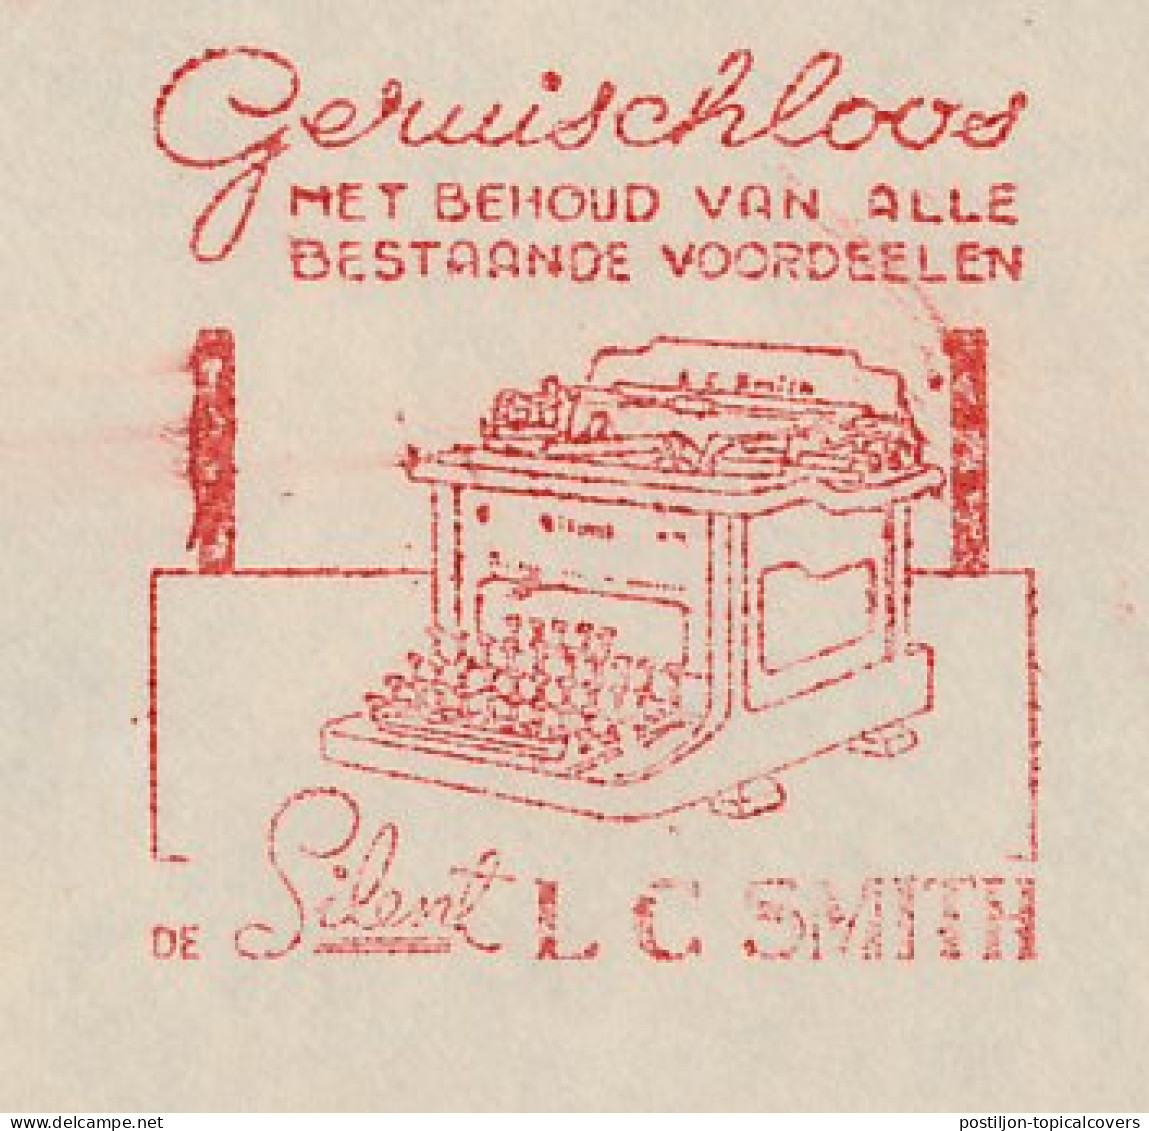 Meter Cover Netherlands 1935 Typewriter - The Silent - L C Smith - Groningen - Unclassified